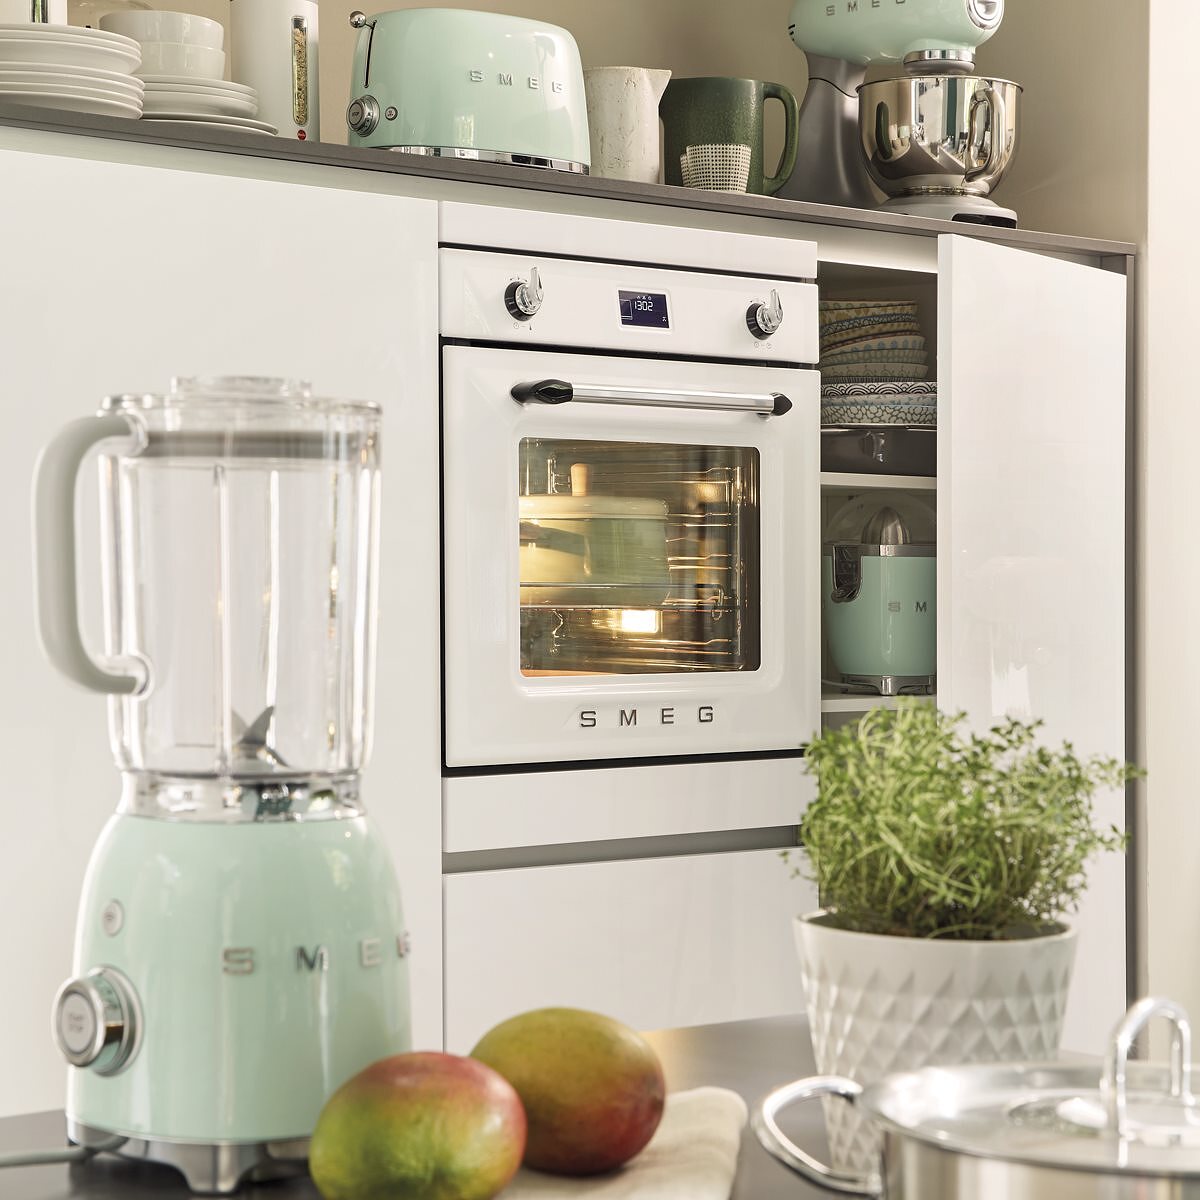 Blend-and-go with Smeg's personal blender - Appliance Retailer